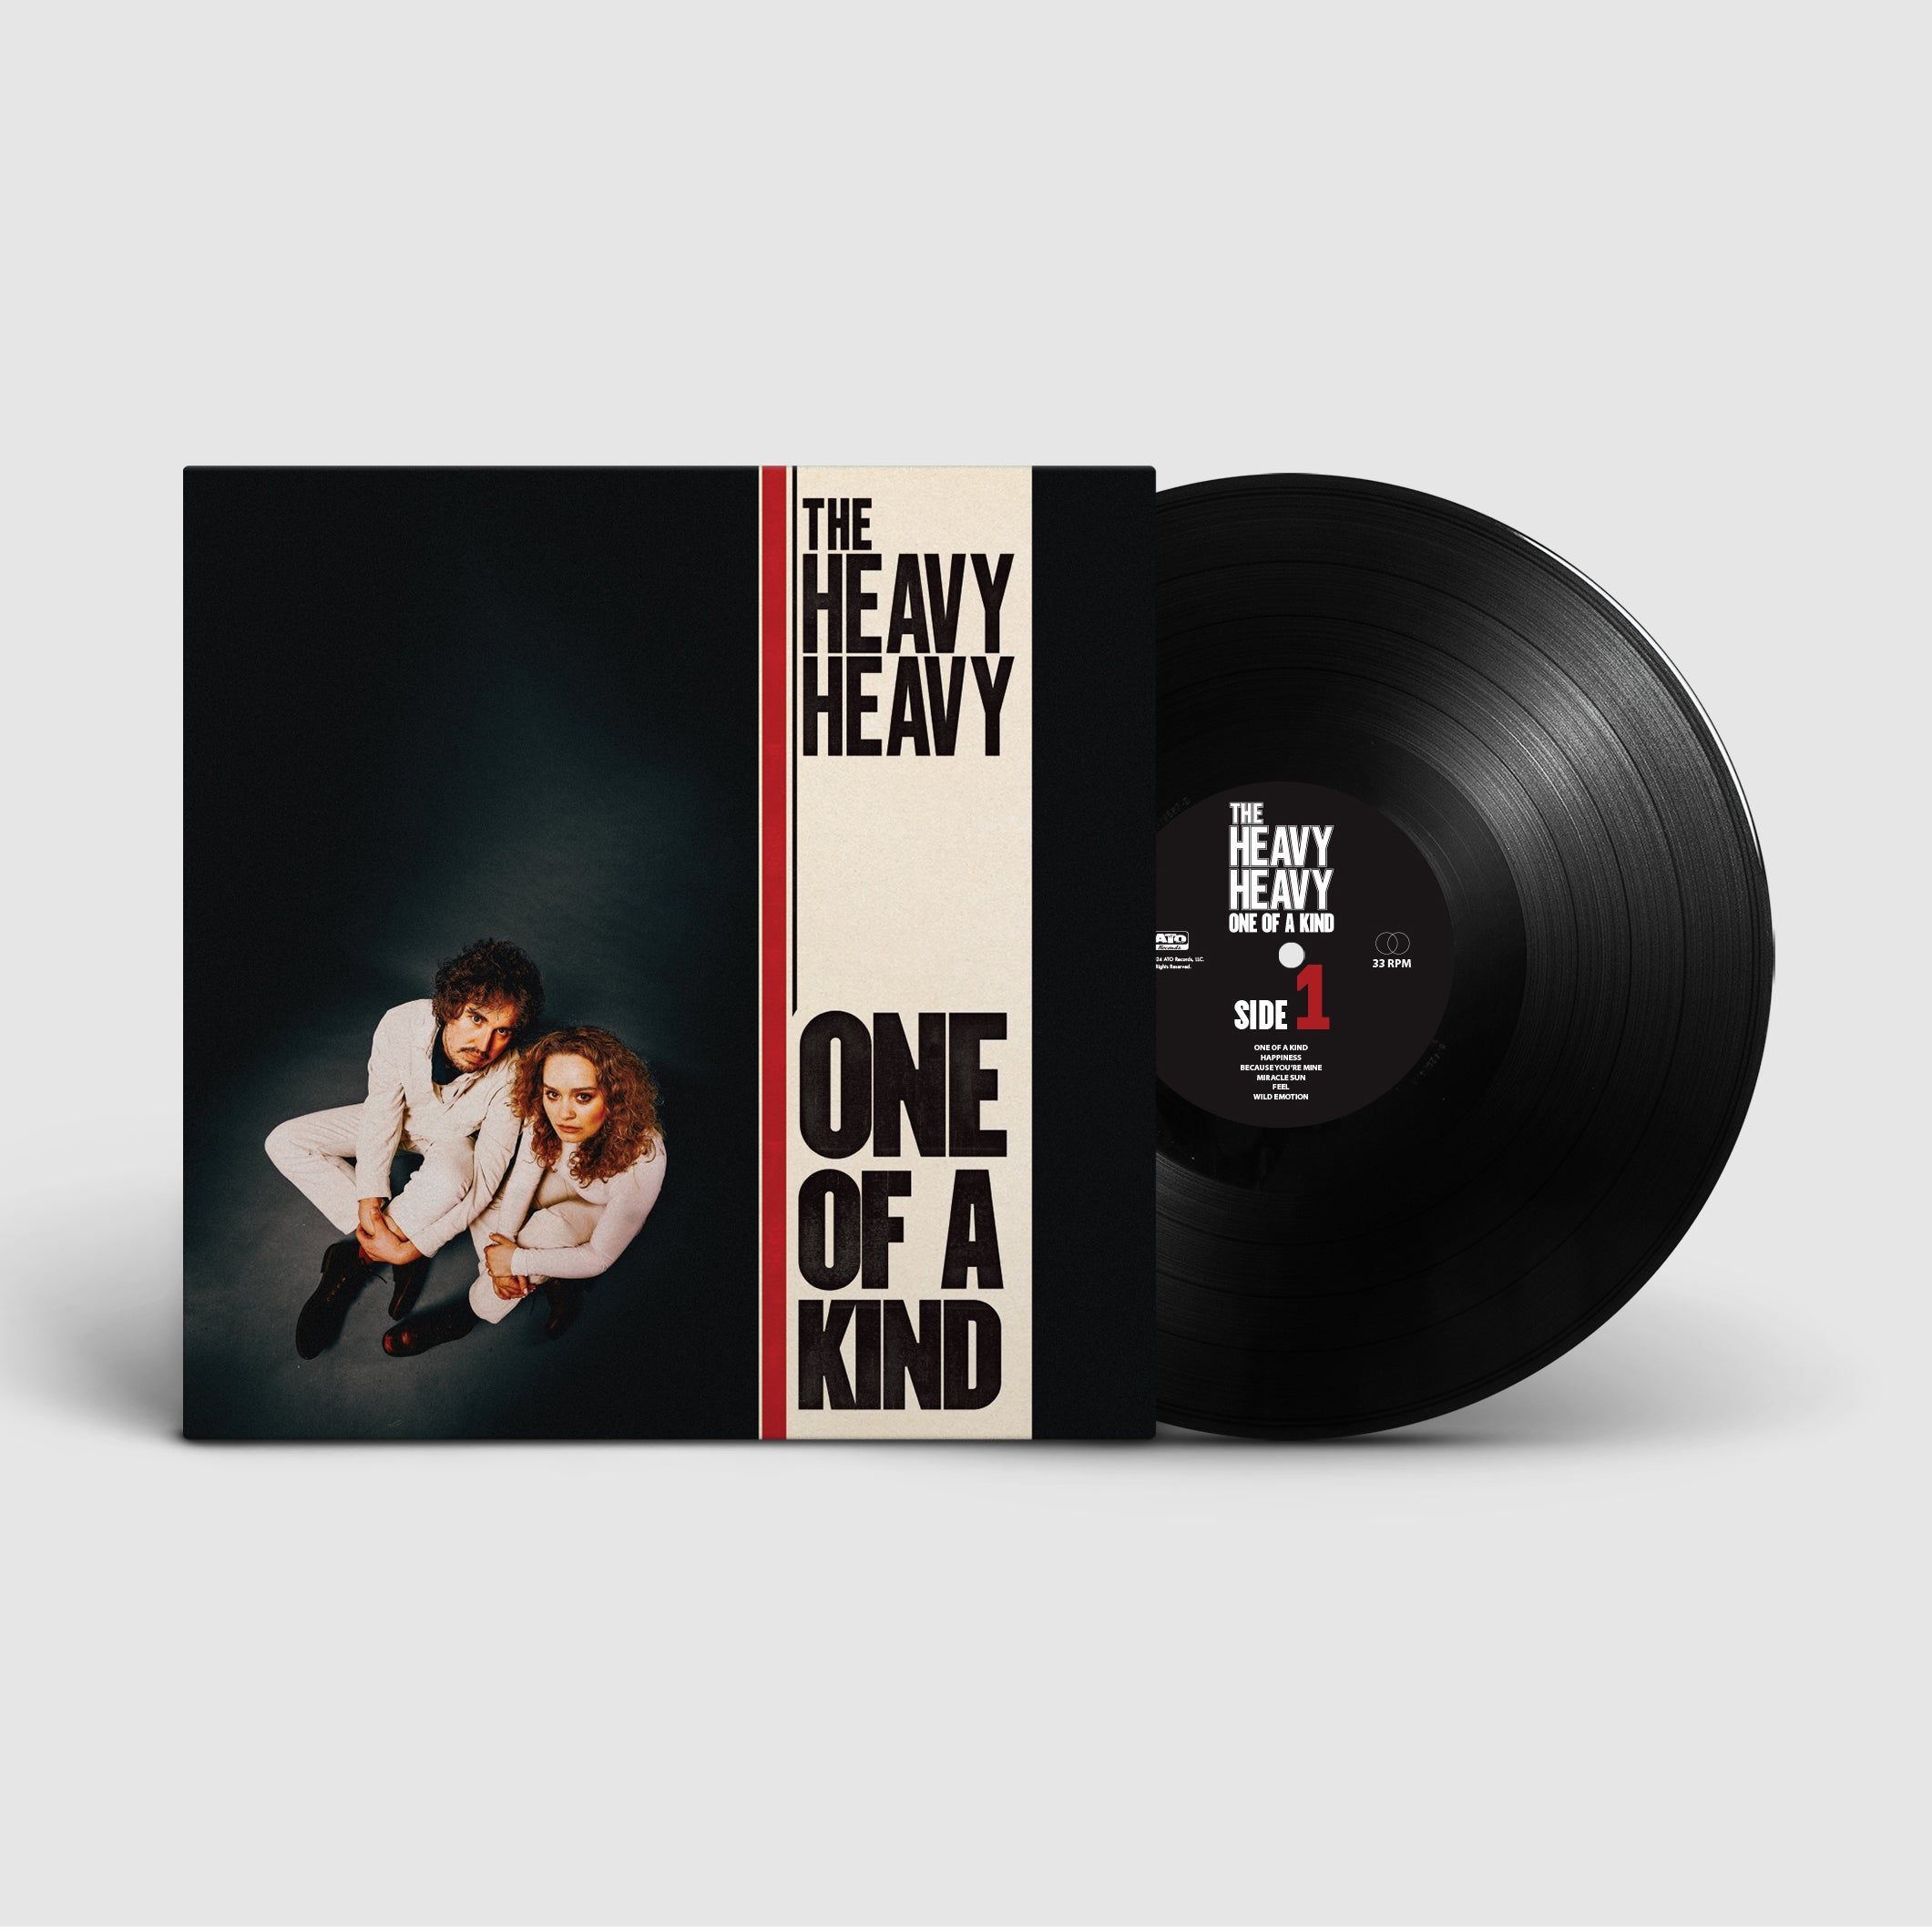 The Heavy Heavy - One of a Kind: Vinyl LP